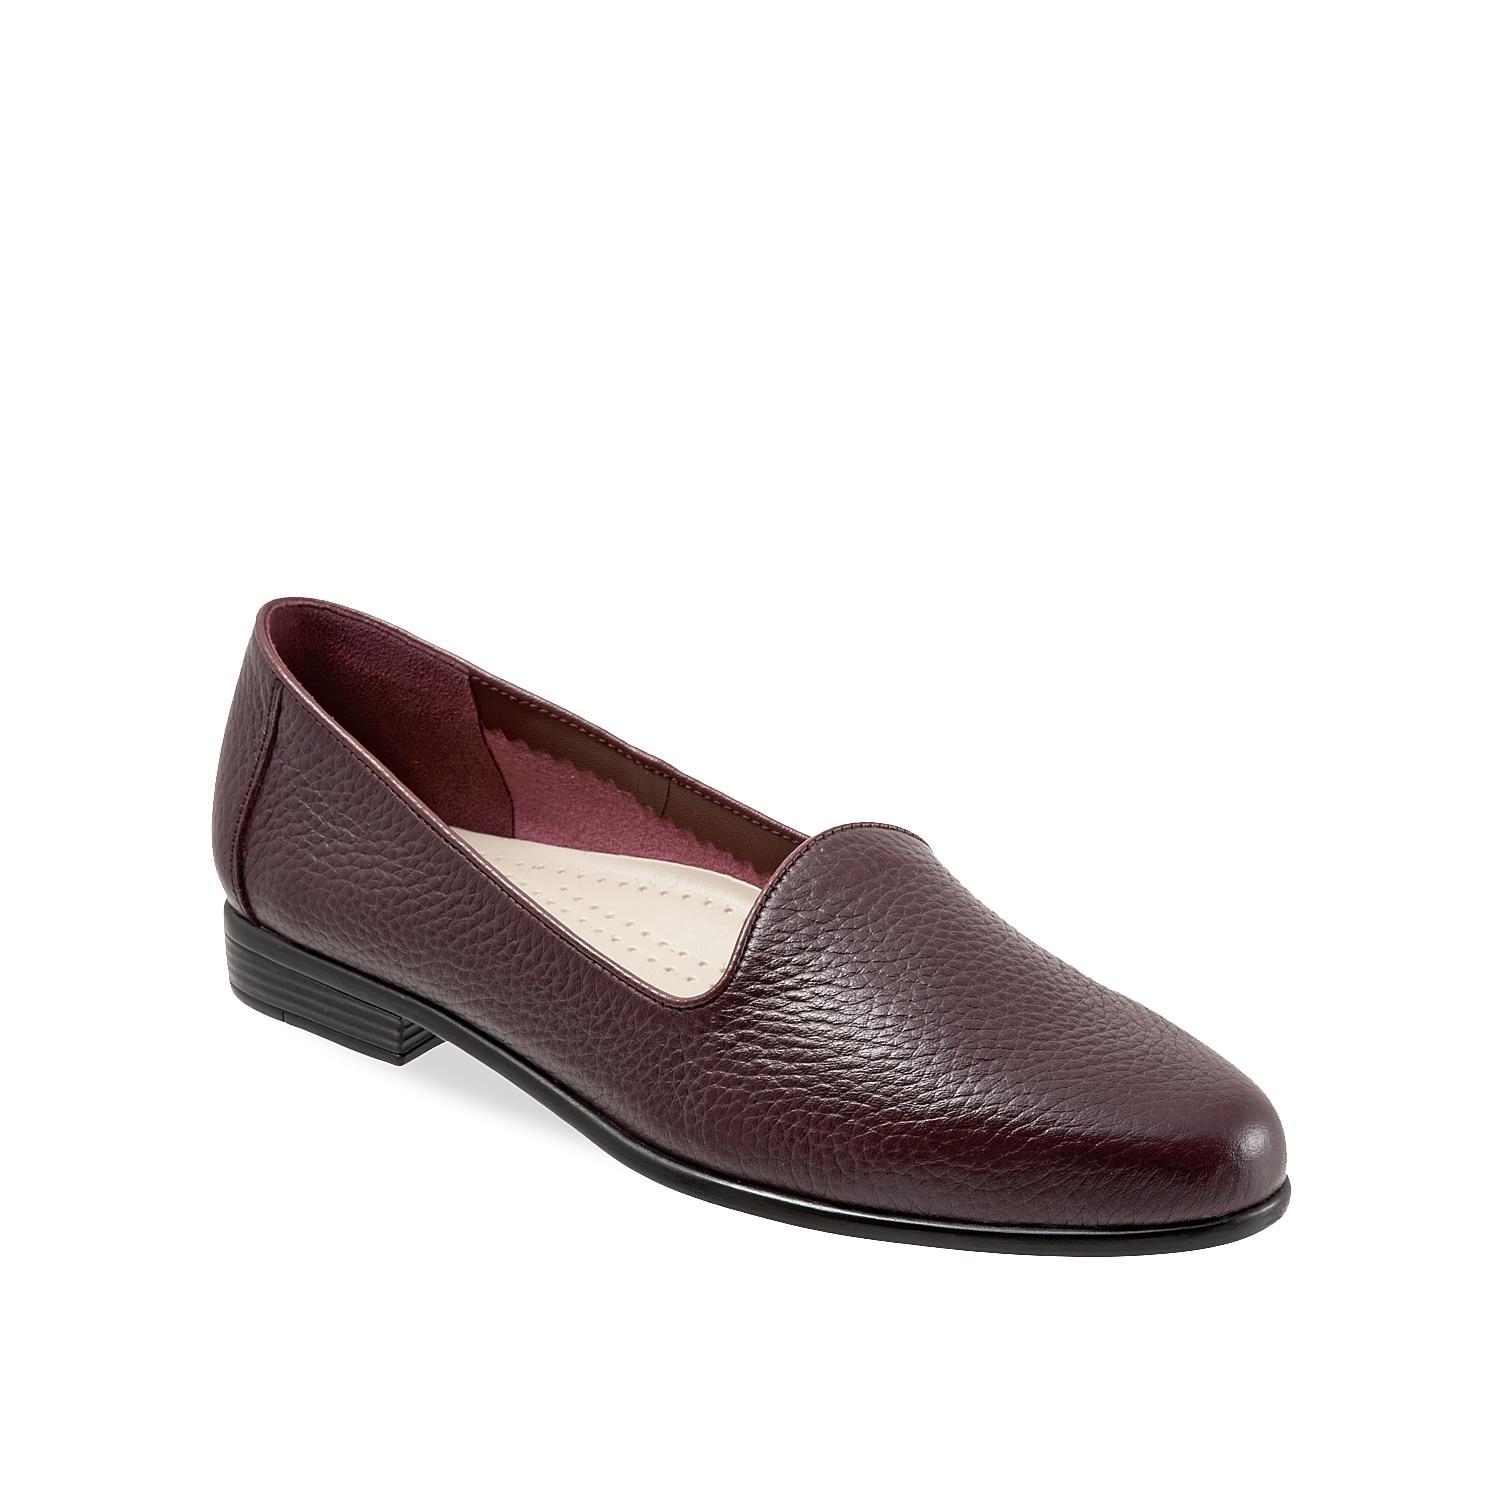 Trotters Liz Loafer Product Image